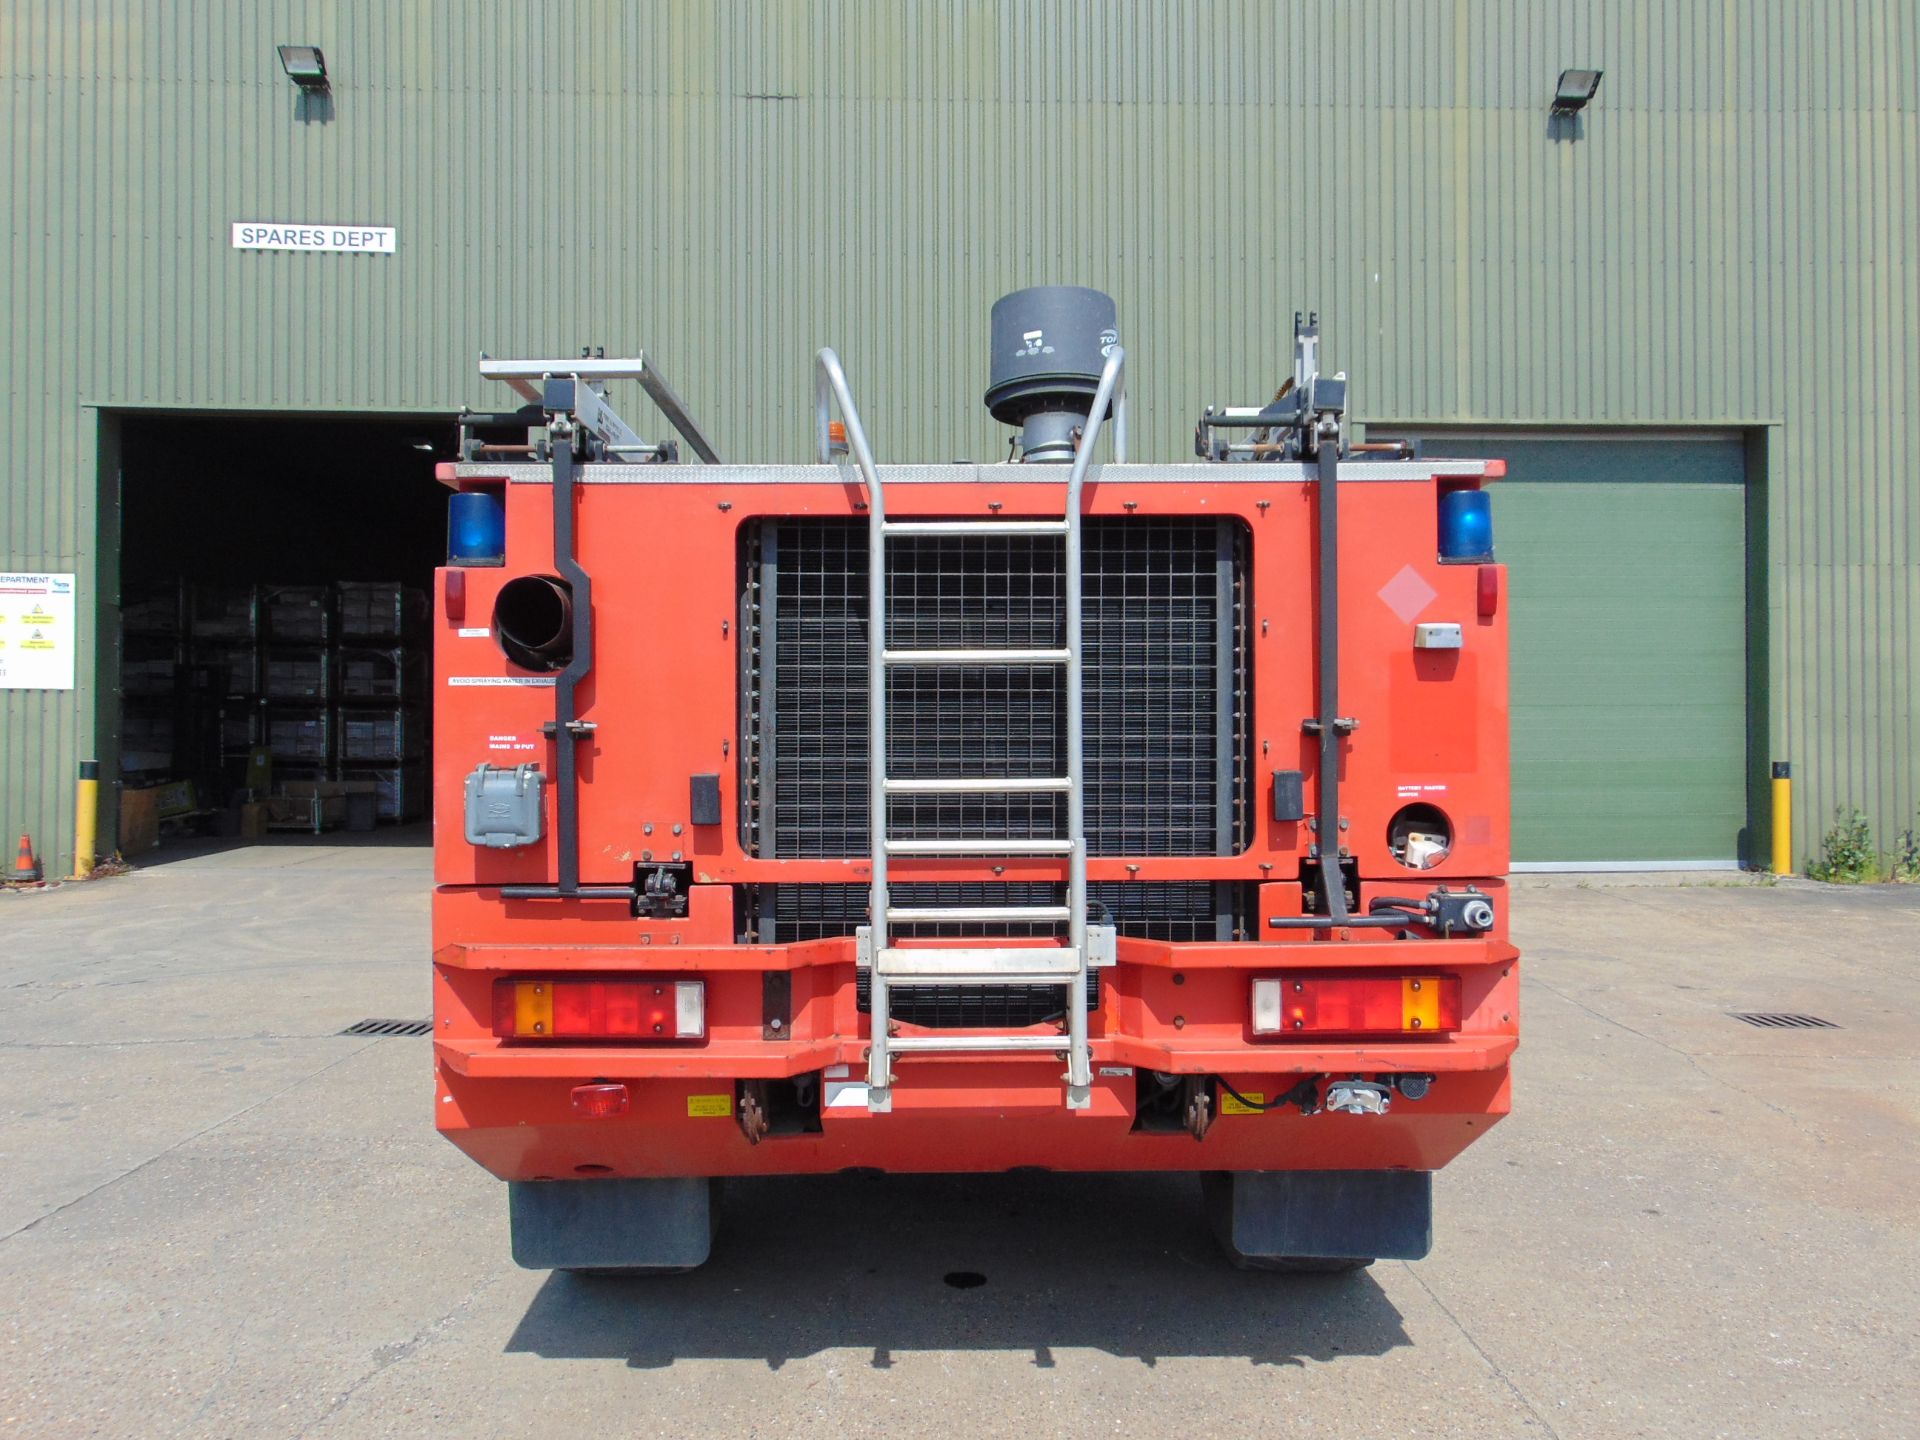 Unipower 4 x 4 Airport Fire Fighting Appliance - Rapid Intervention Vehicle - Image 13 of 73